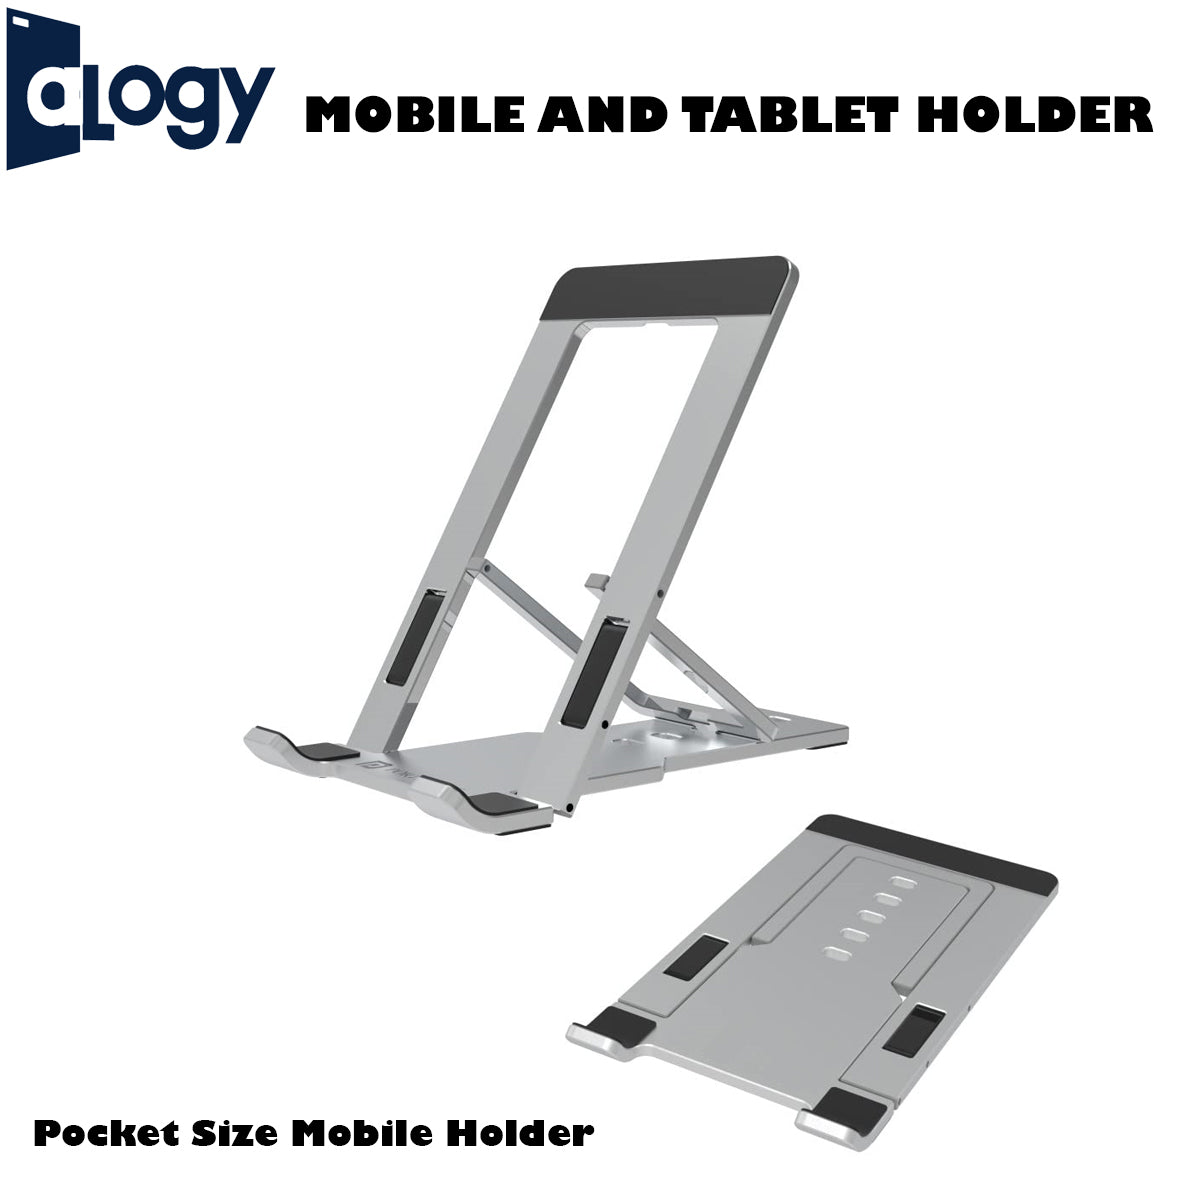 ALOGY Mobile and tablet holder Phone Desk Phone Holder Stand For Mobile Adjustable Desktop Holder Universal Table Cell Phone Stand